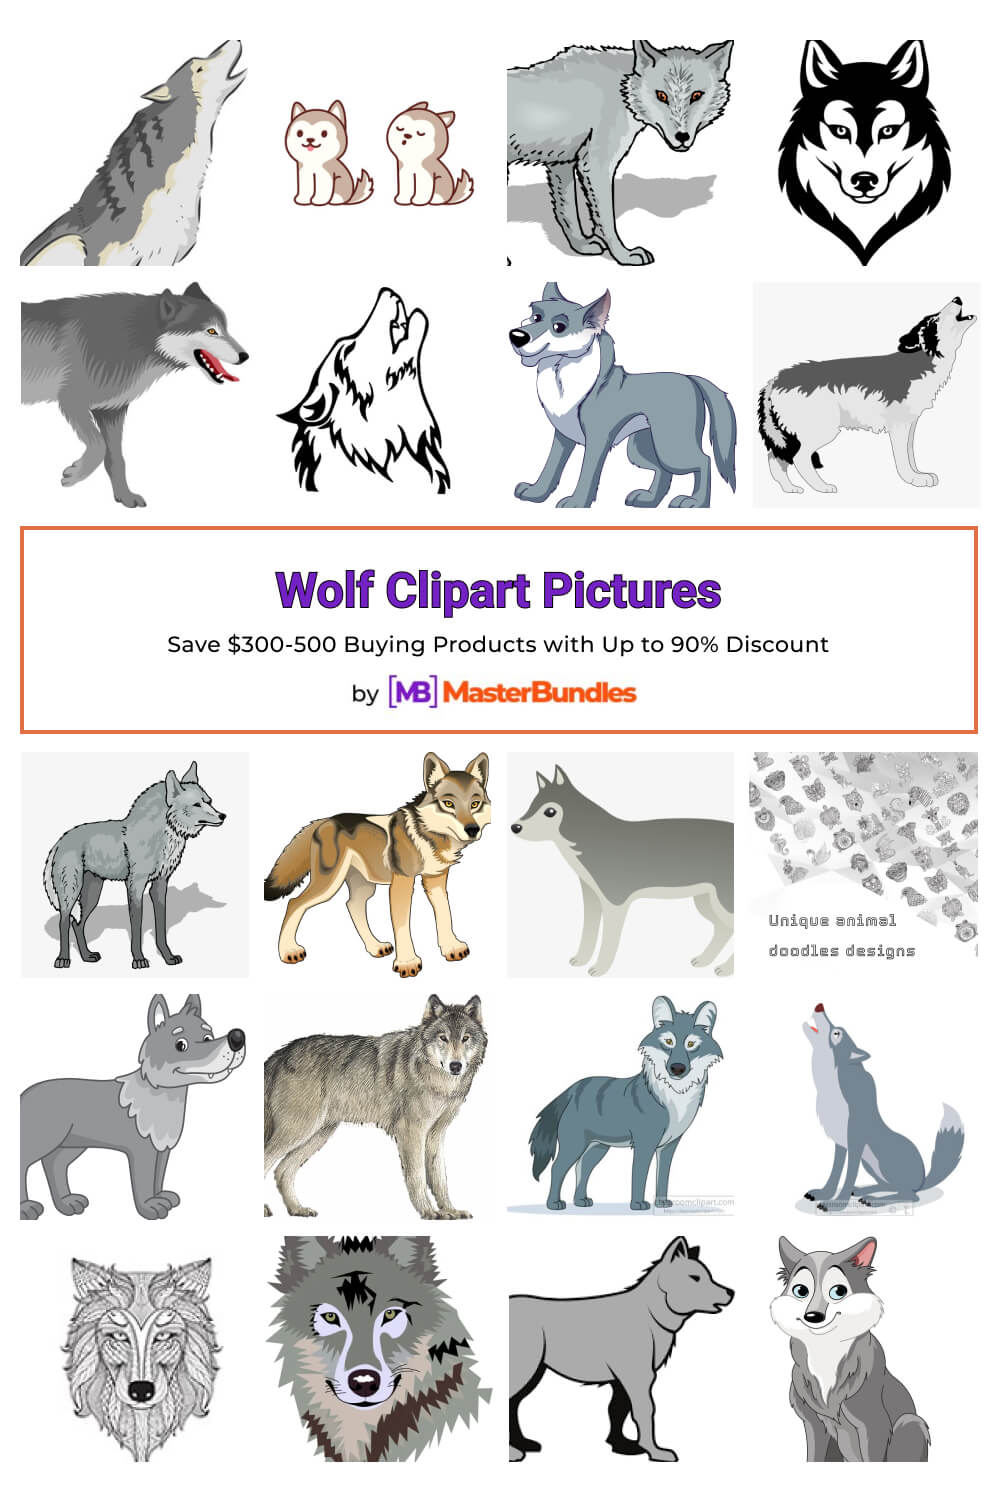 wolf clipart pictures pinterest image.